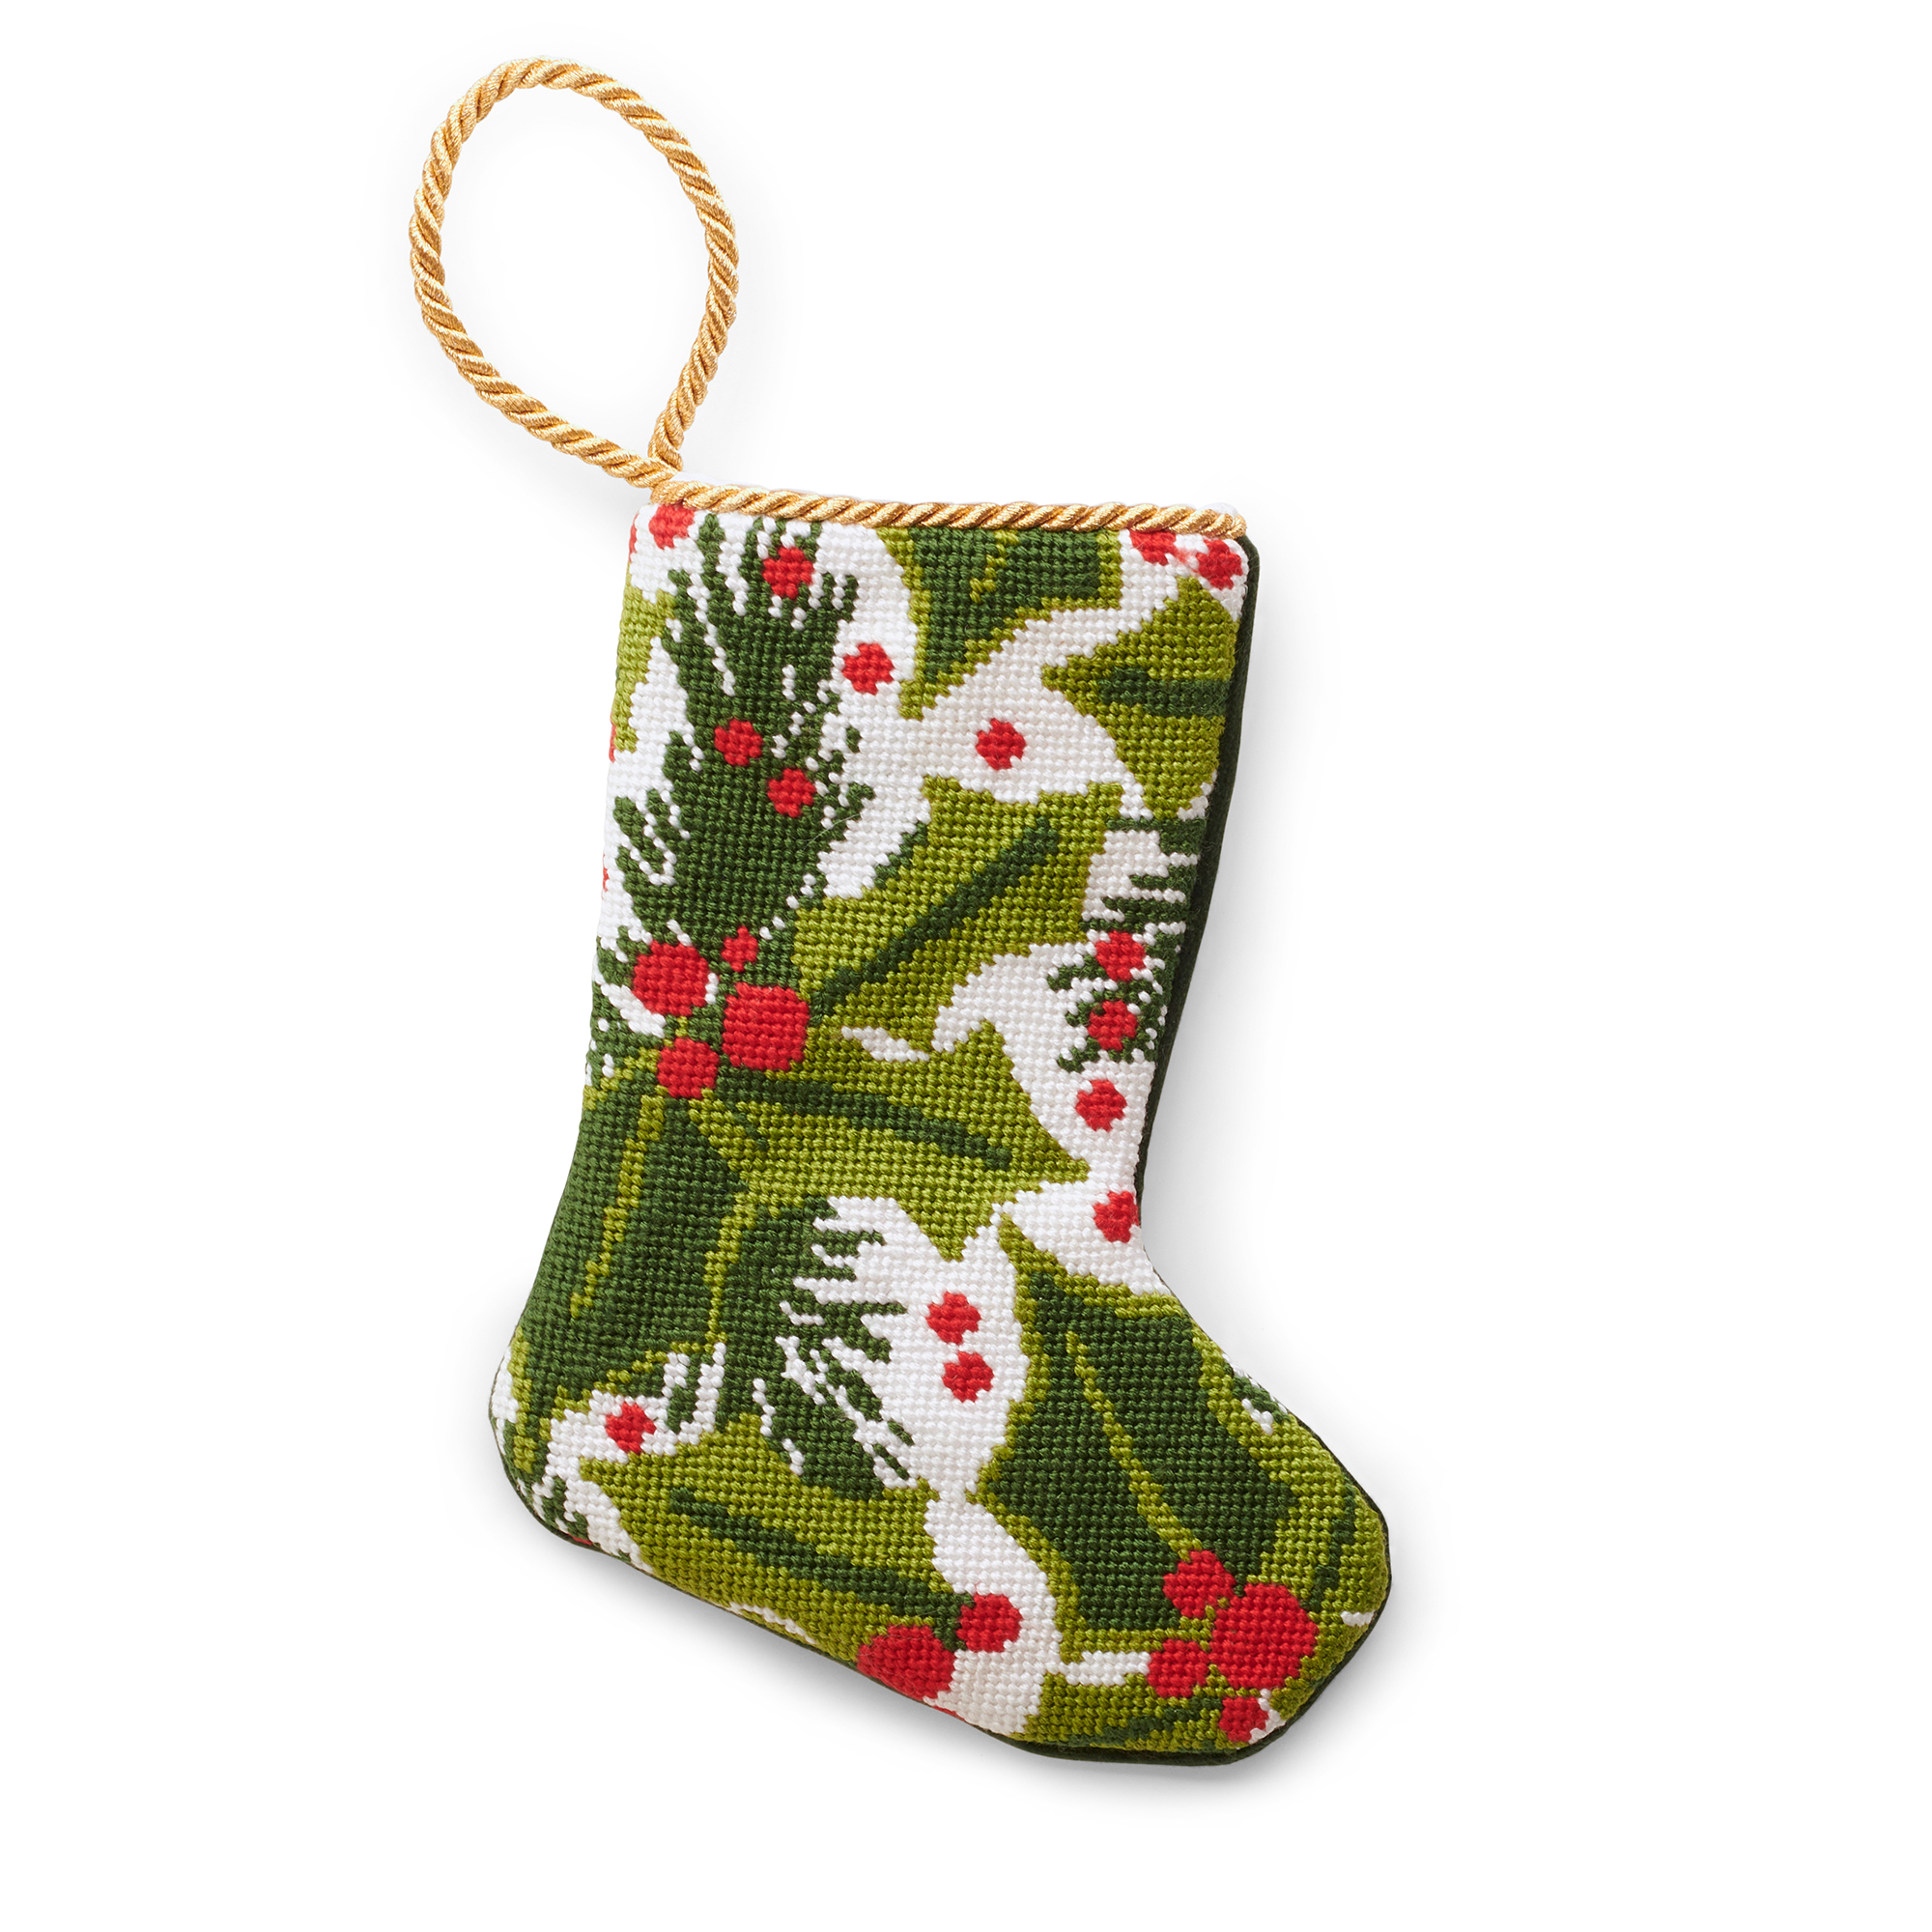 A festive Christmas stocking featuring a detailed needlepoint design of holly leaves and red berries. The stocking is primarily green with white accents and a touch of red, creating a classic holiday look. It has a gold loop for easy hanging, making it a perfect addition to your holiday décor.